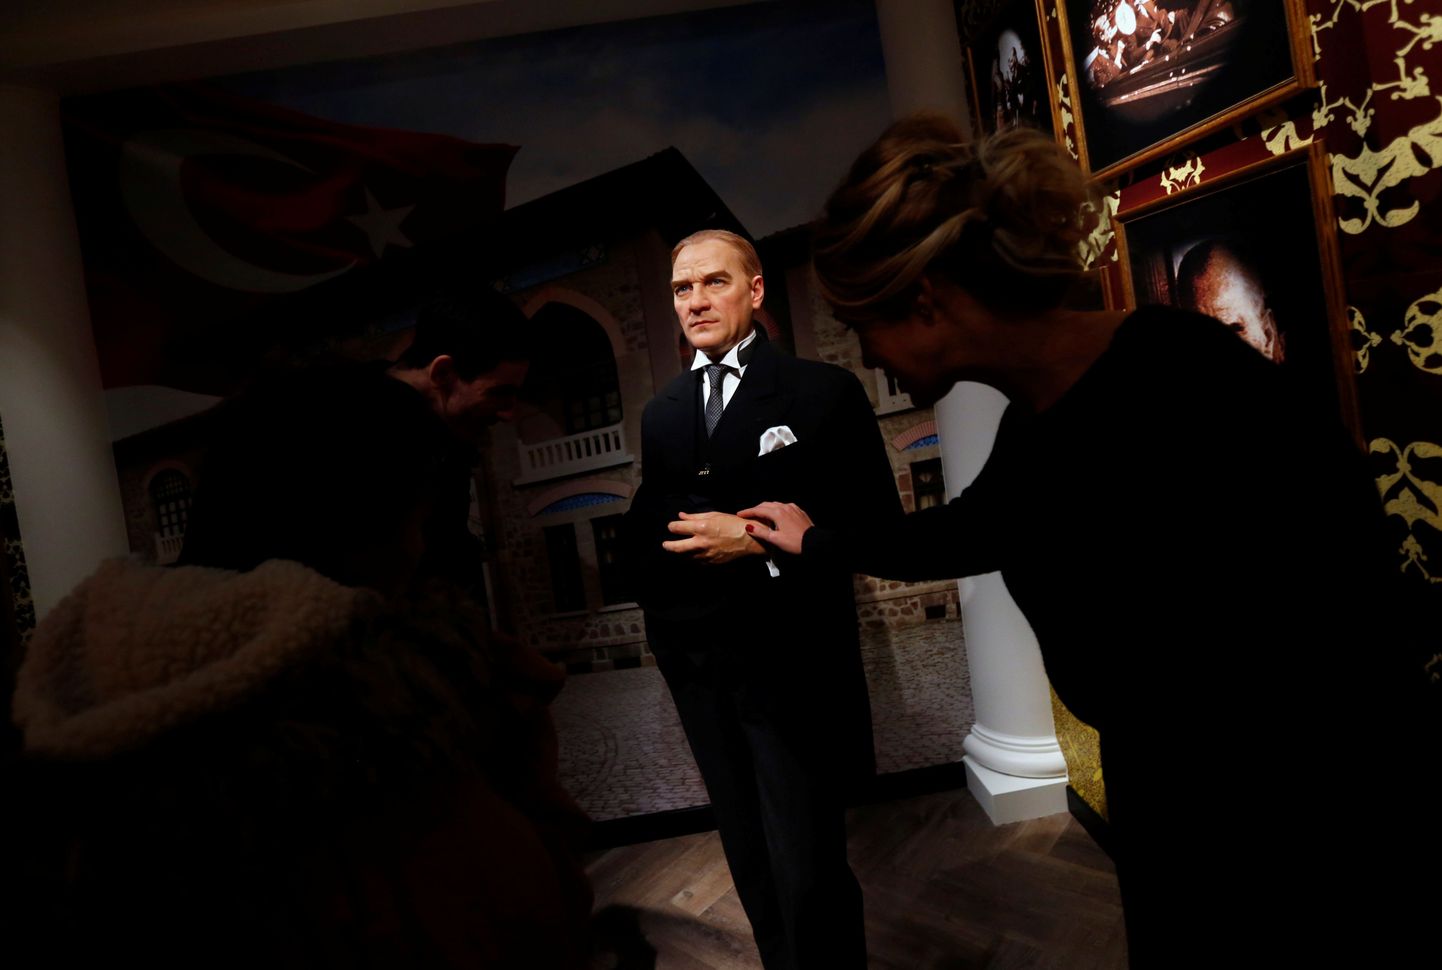 A visitor touches a wax figure of modern Turkey's founder Mustafa Kemal Ataturk during a preview visit at a new Madame Tussauds museum in Istanbul, Turkey November 22, 2016. REUTERS/Murad Sezer   FOR EDITORIAL USE ONLY. NO RESALES. NO ARCHIVES